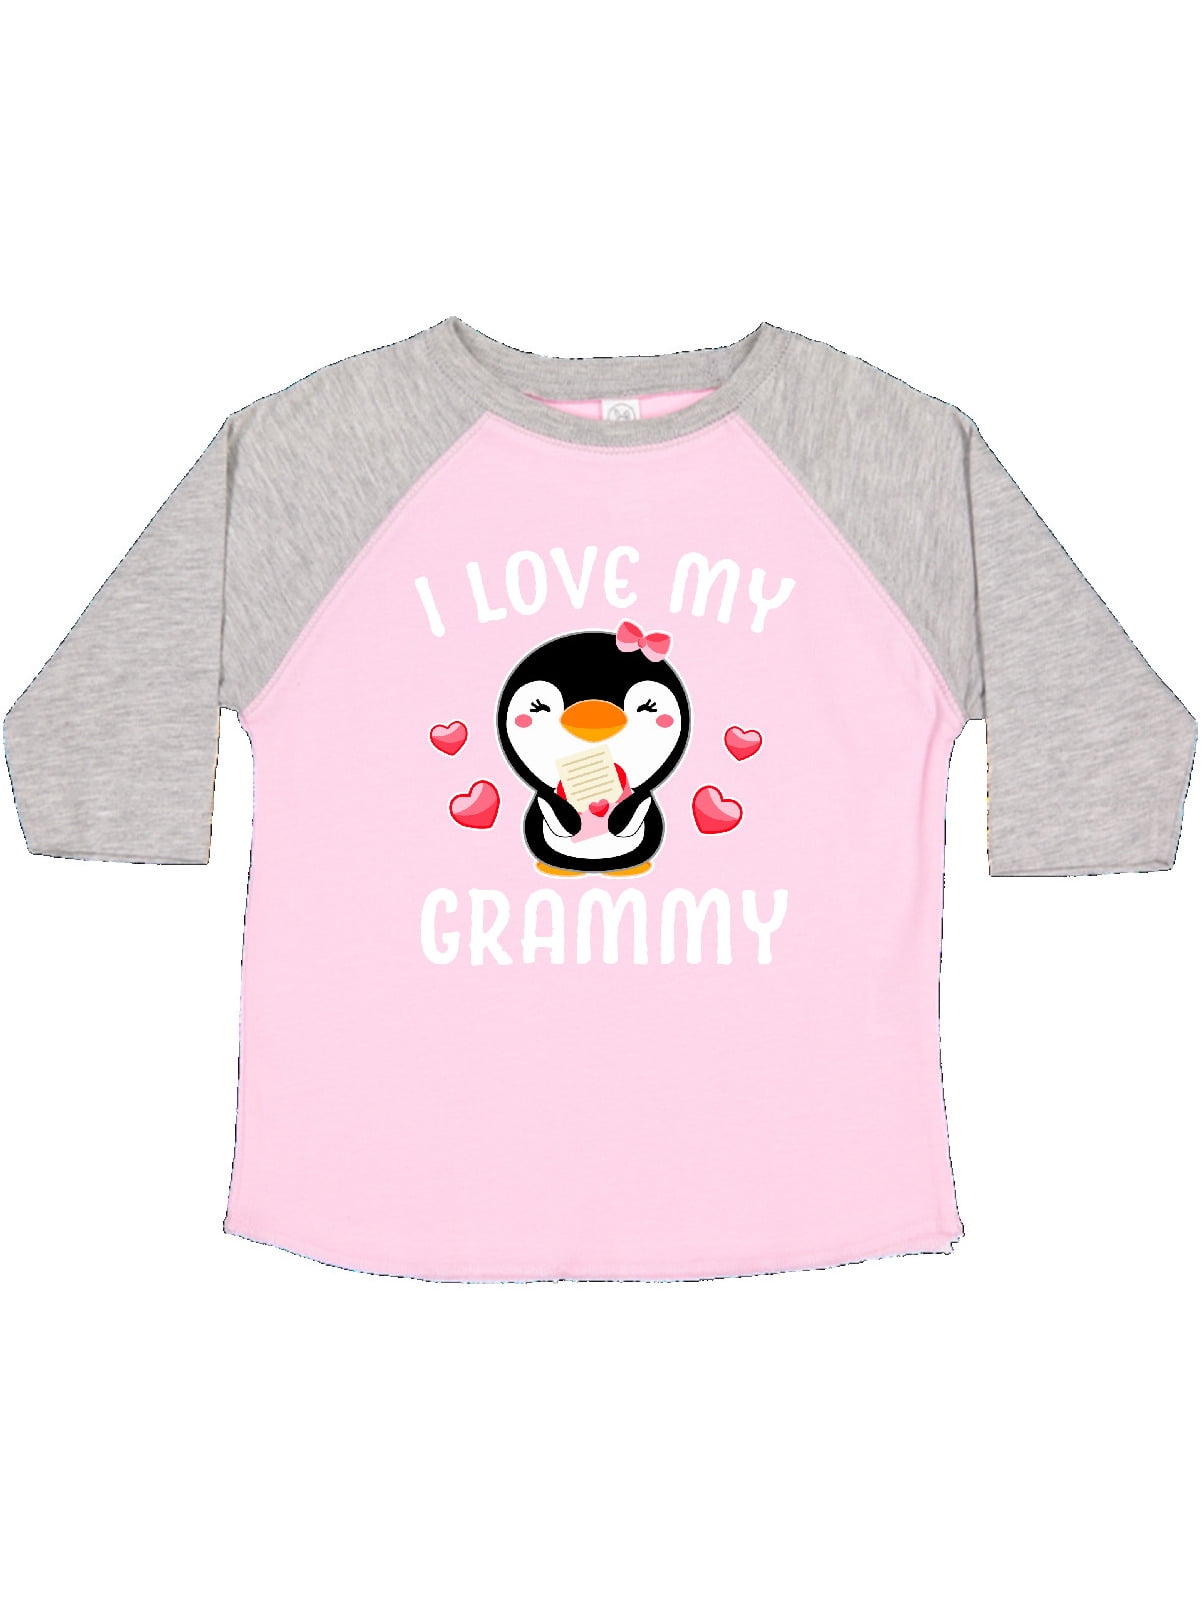 inktastic I Love My Grammy with Cute Penguin and Hearts Toddler T-Shirt